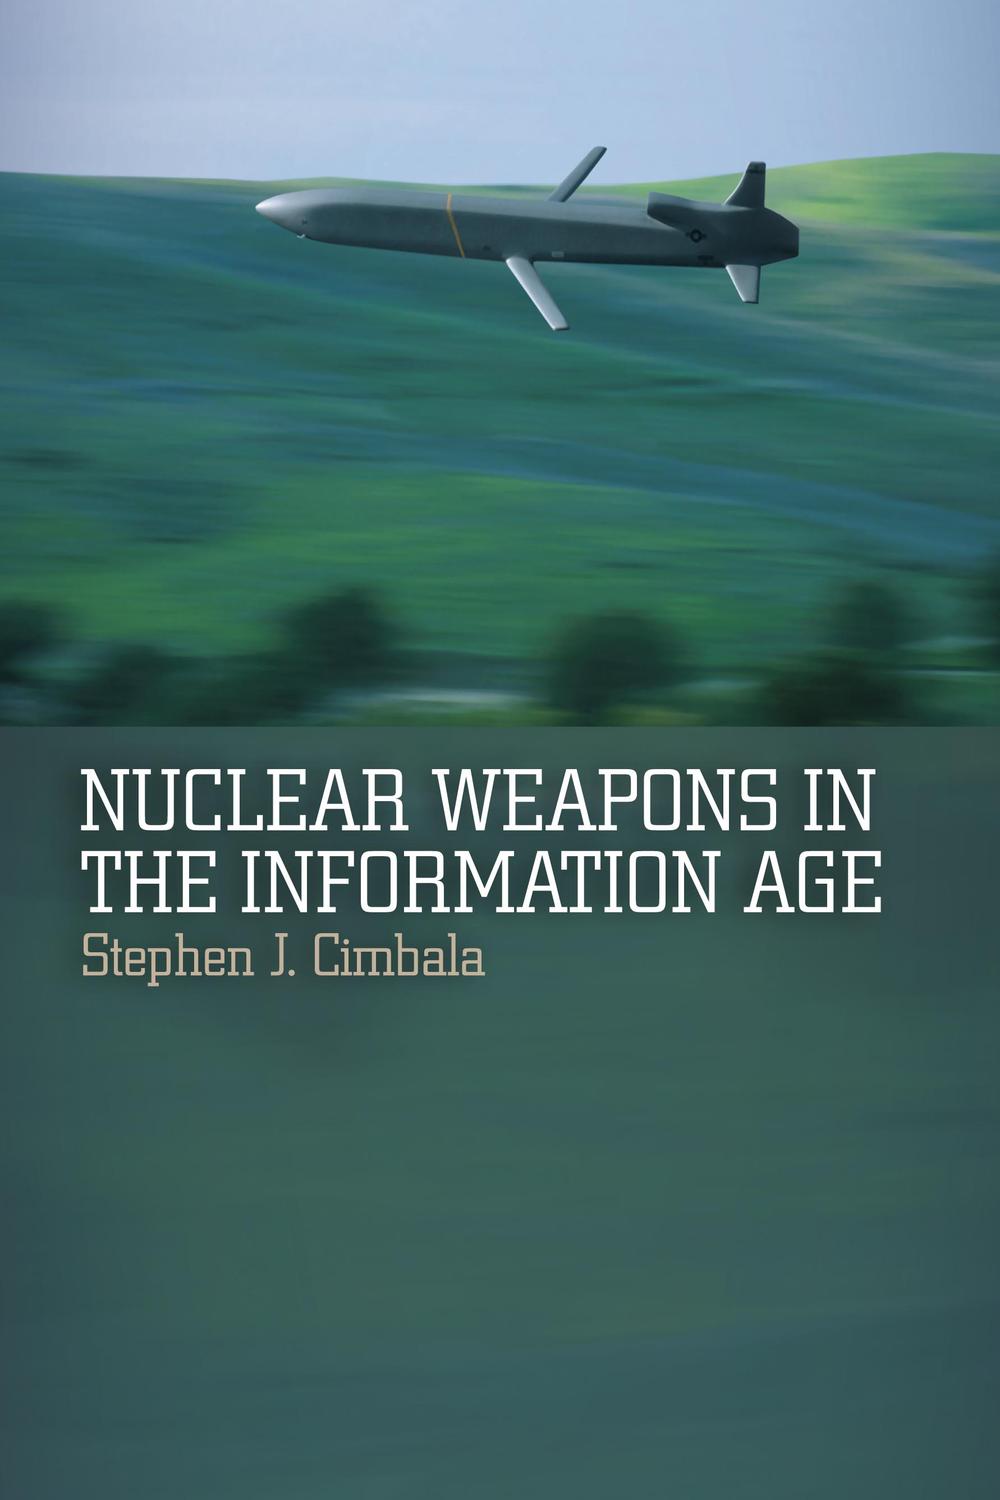 Nuclear Weapons in the Information Age - Stephen J. Cimbala